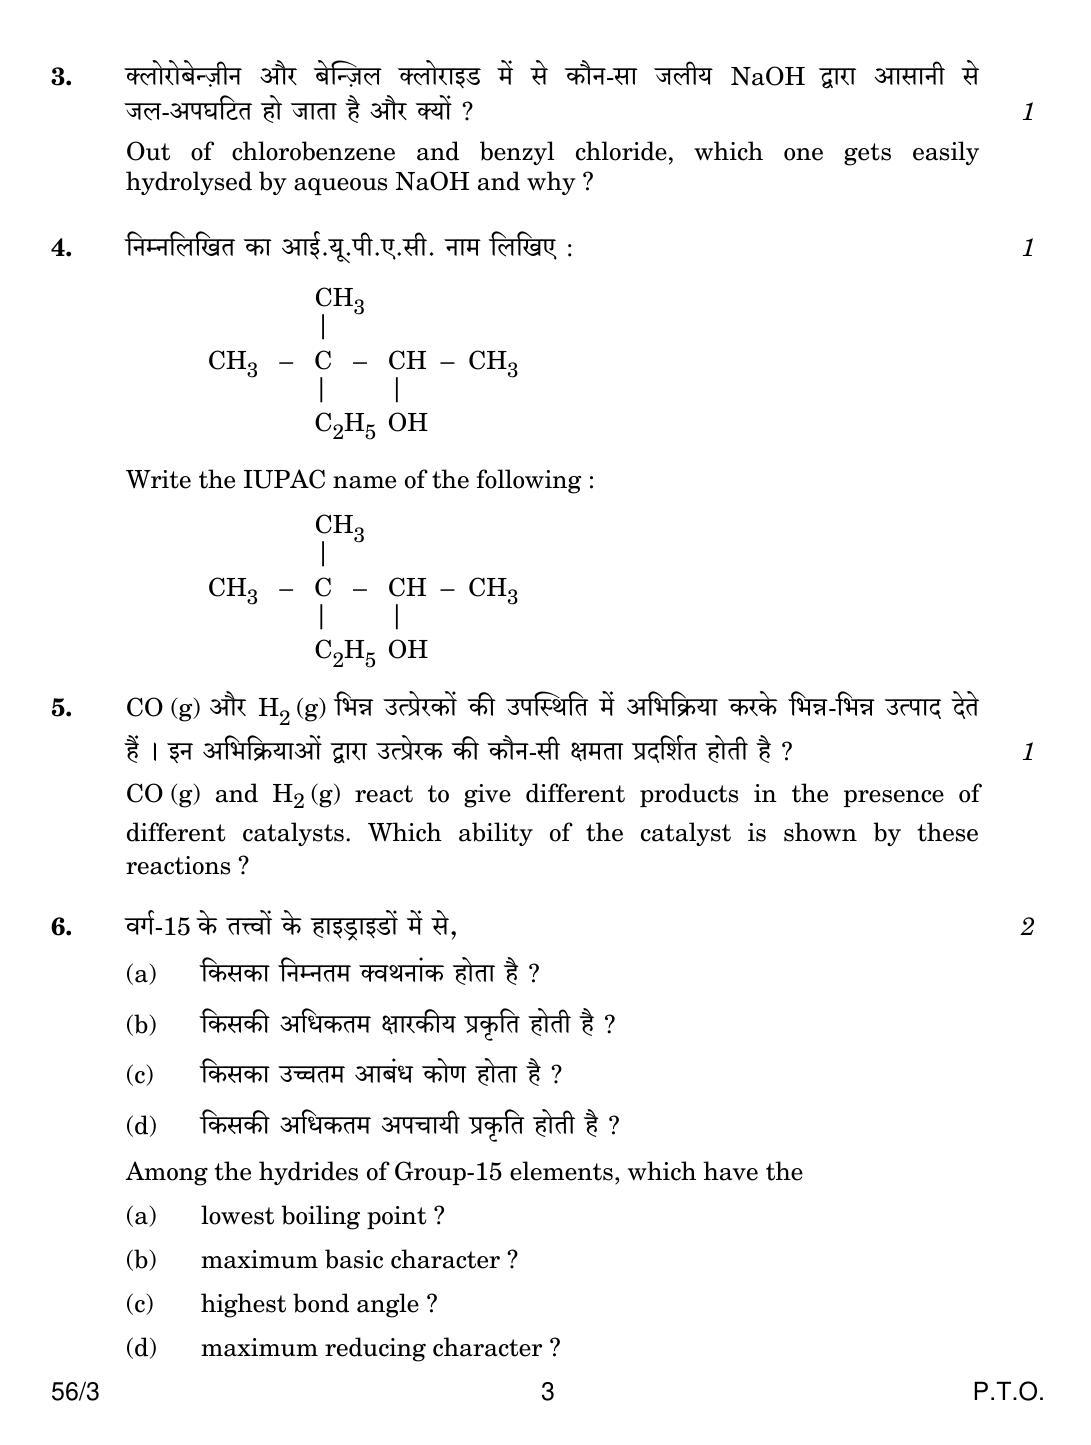 CBSE Class 12 56-3 CHEMISTRY 2018 Question Paper - Page 3